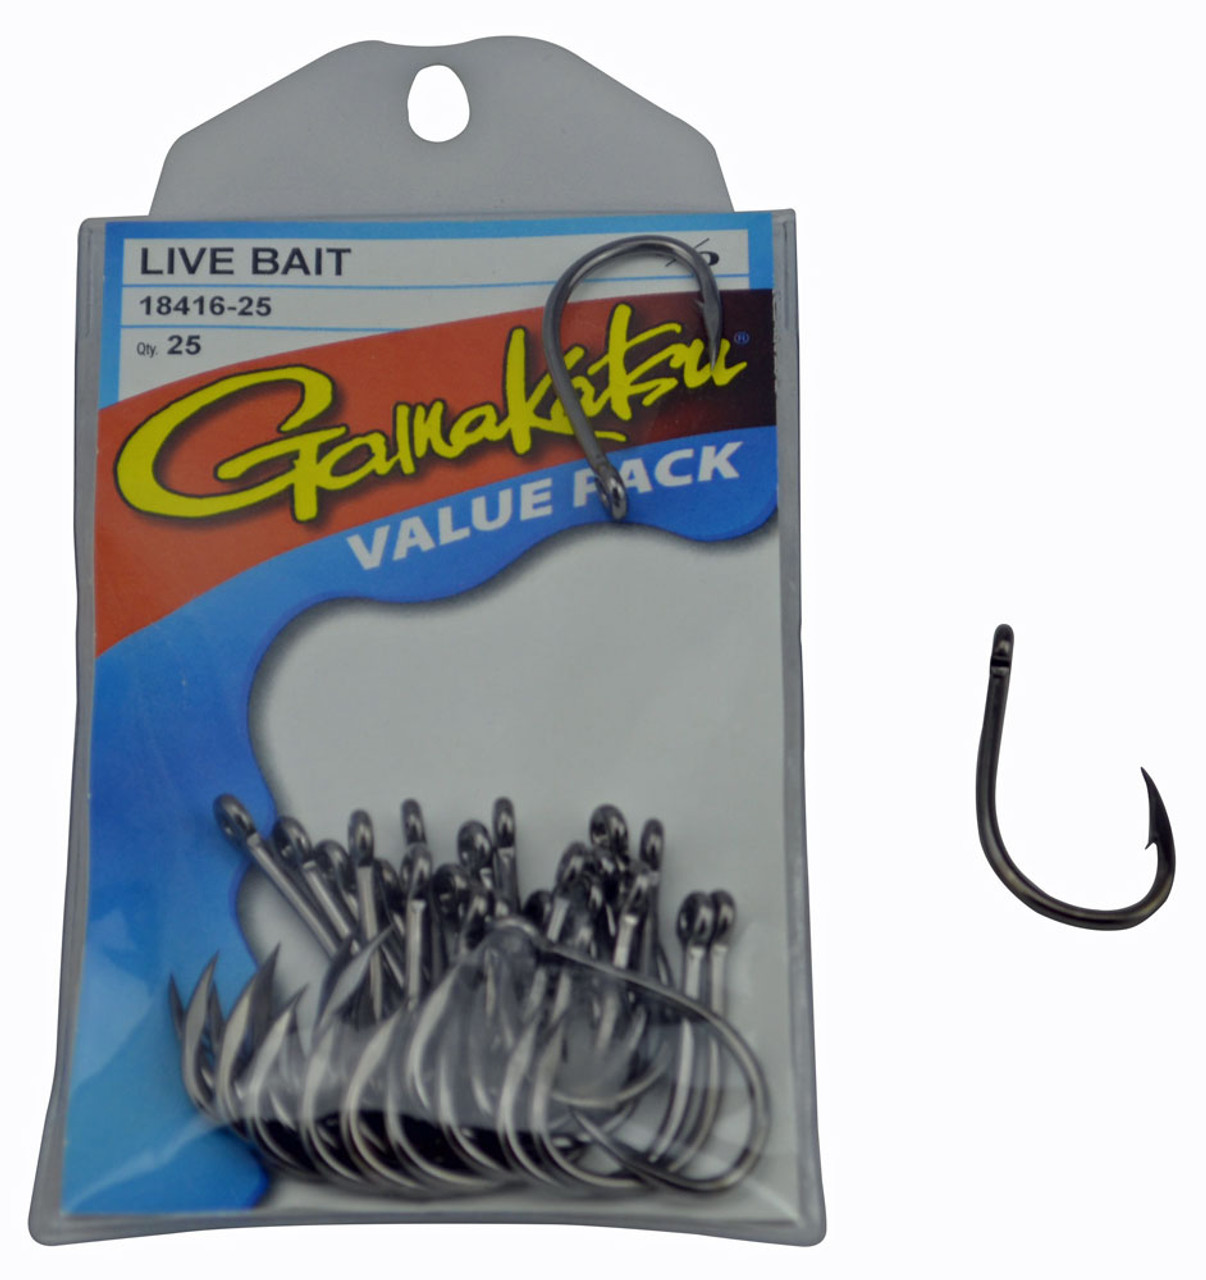 Gamakatsu Live Bait Hook with Ring, Size 2/0